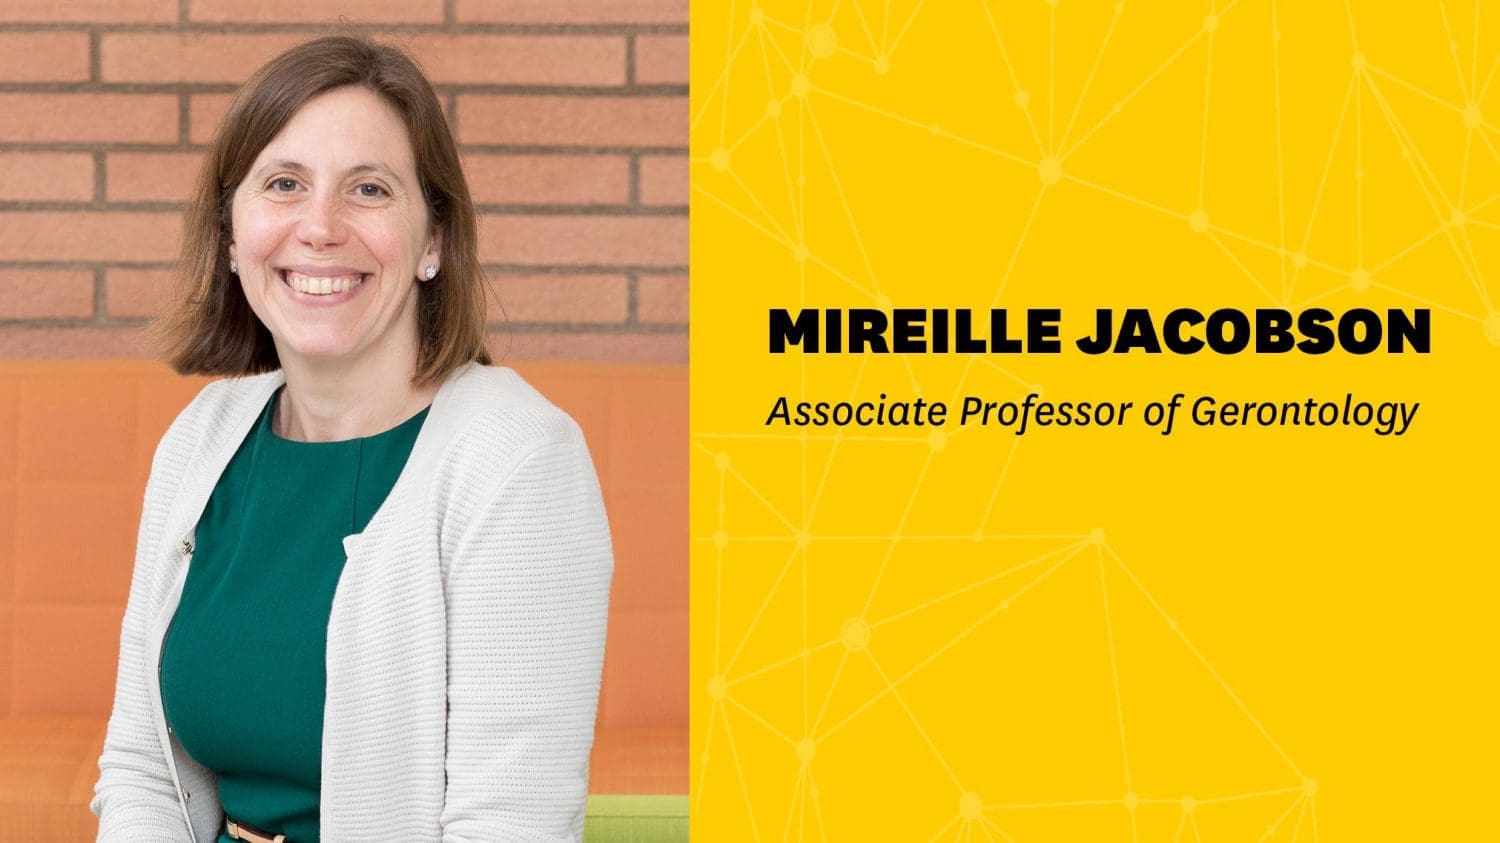 Headshot of Mireille Jacobson with name and faculty title